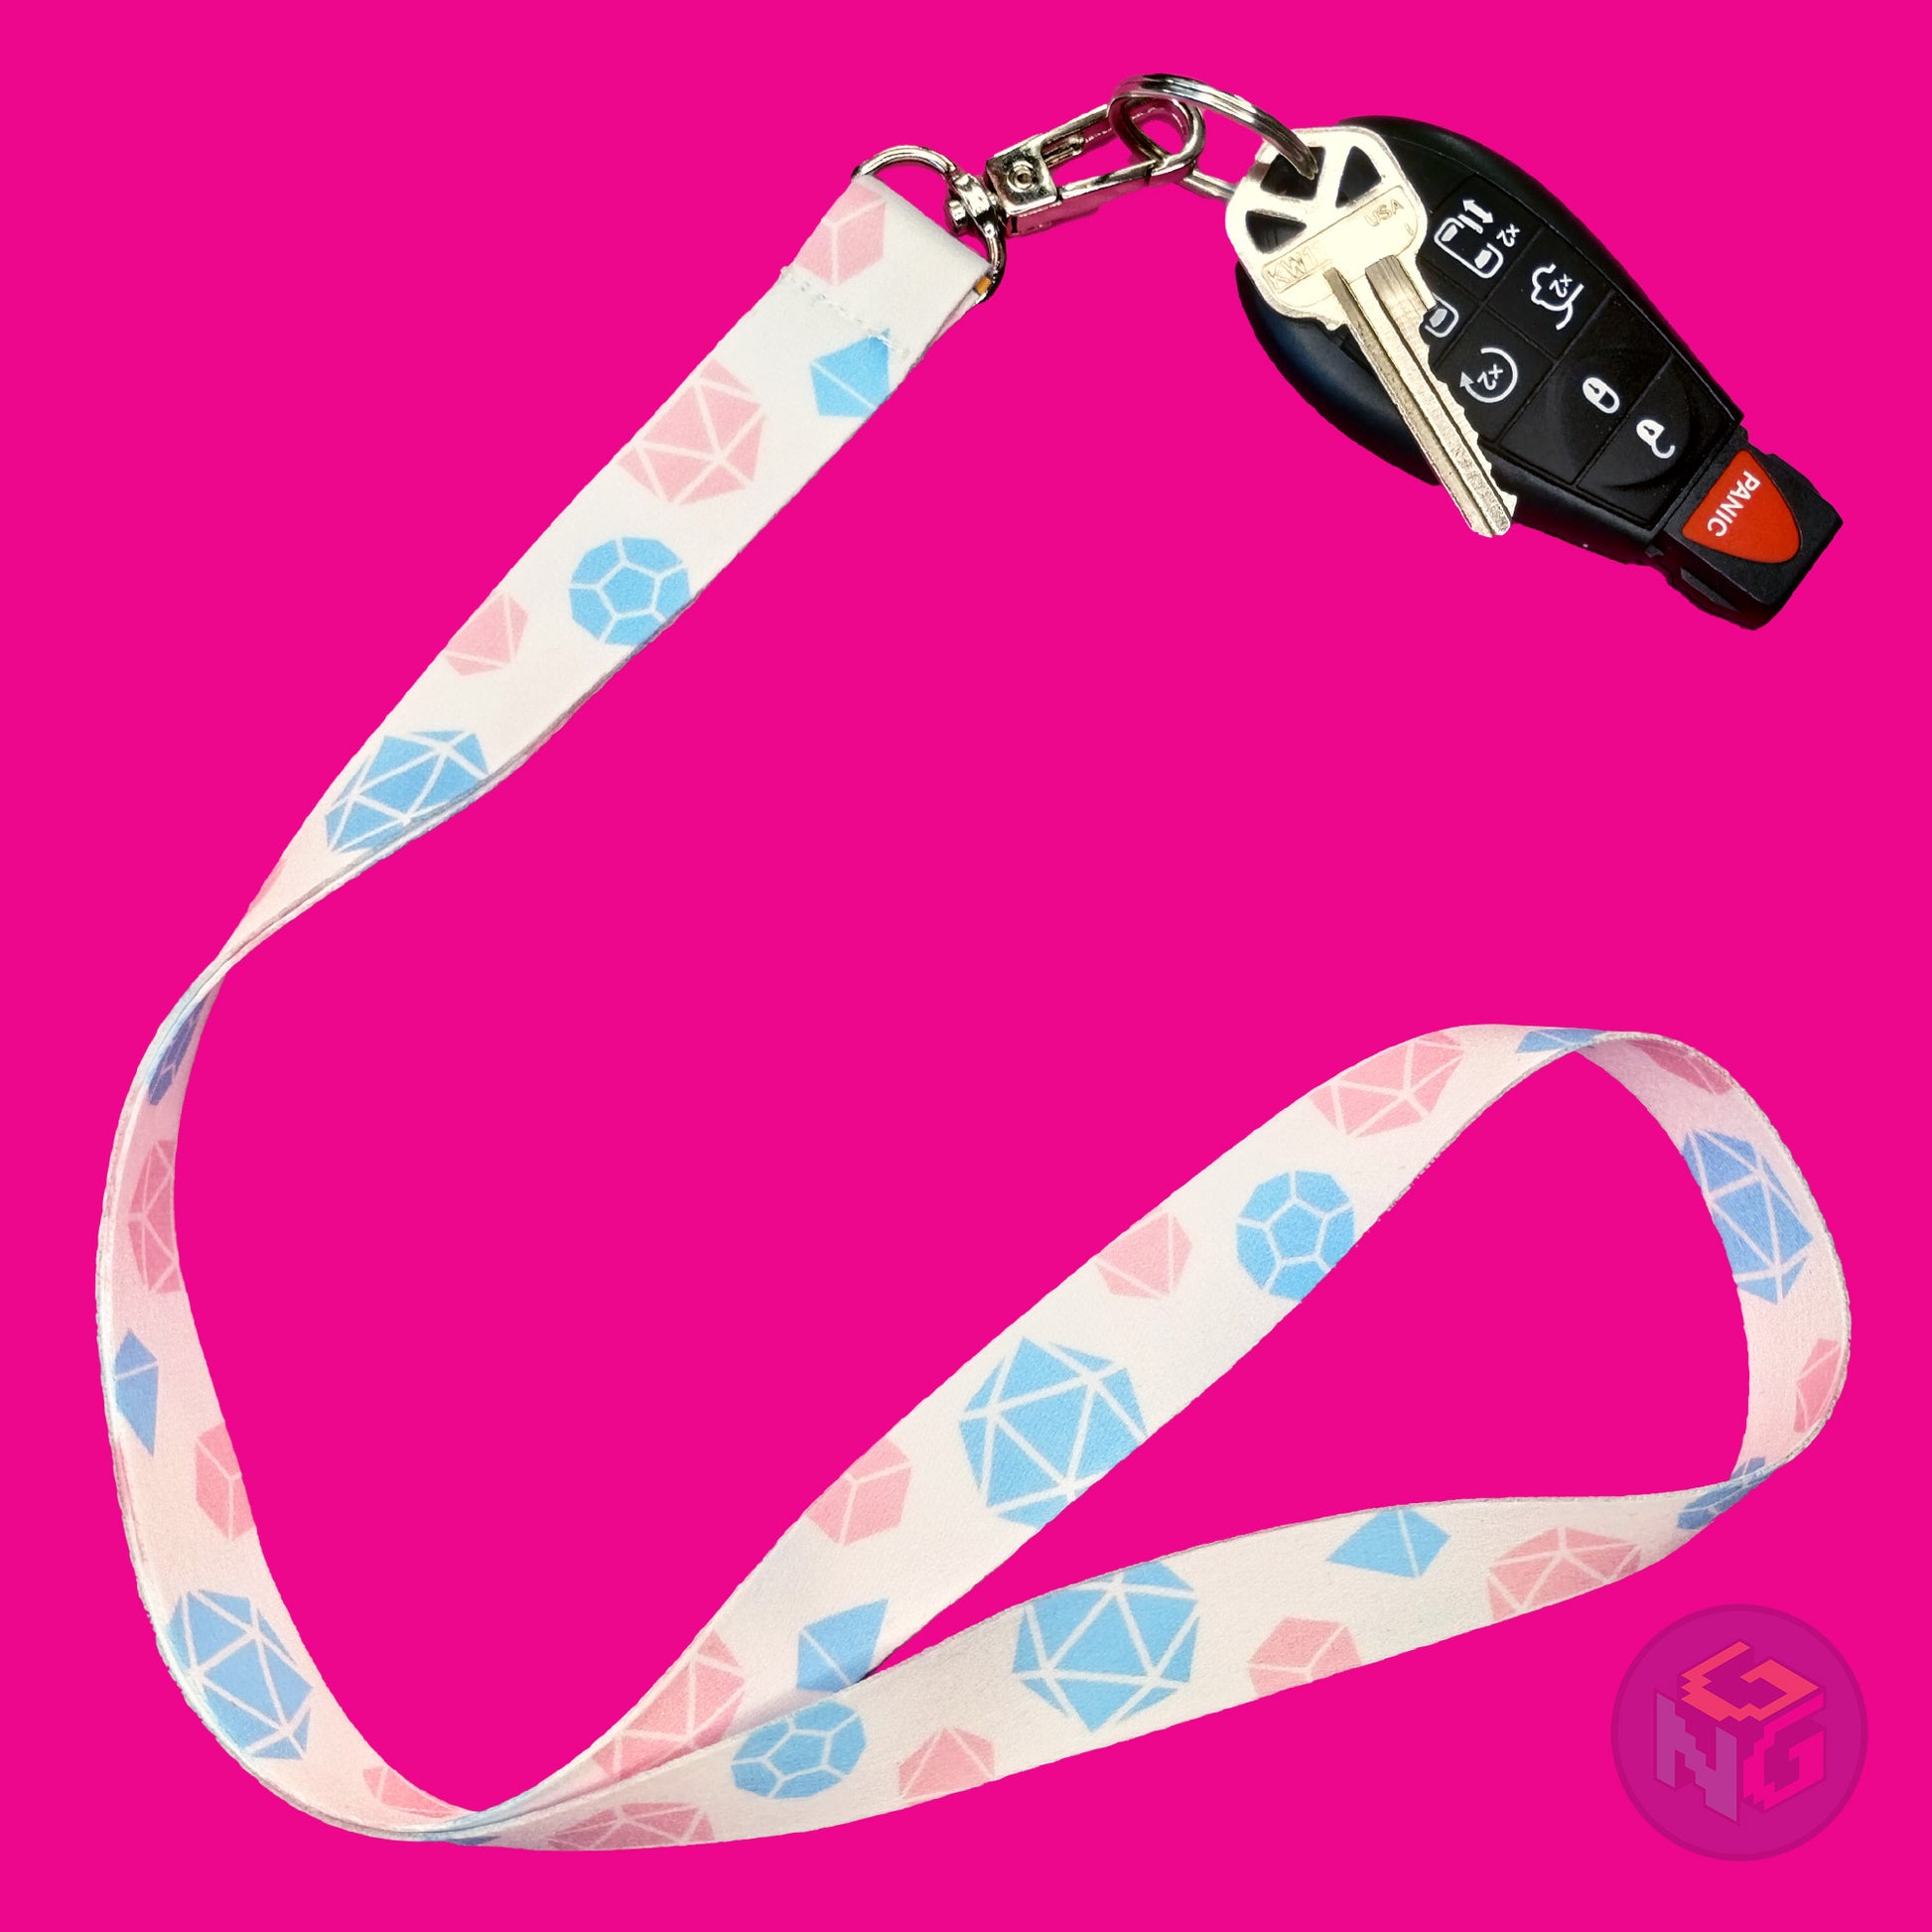 white dnd transgender lanyard showing the pink and blue tabletop dice with a key fob clipped to the end of the lanyard